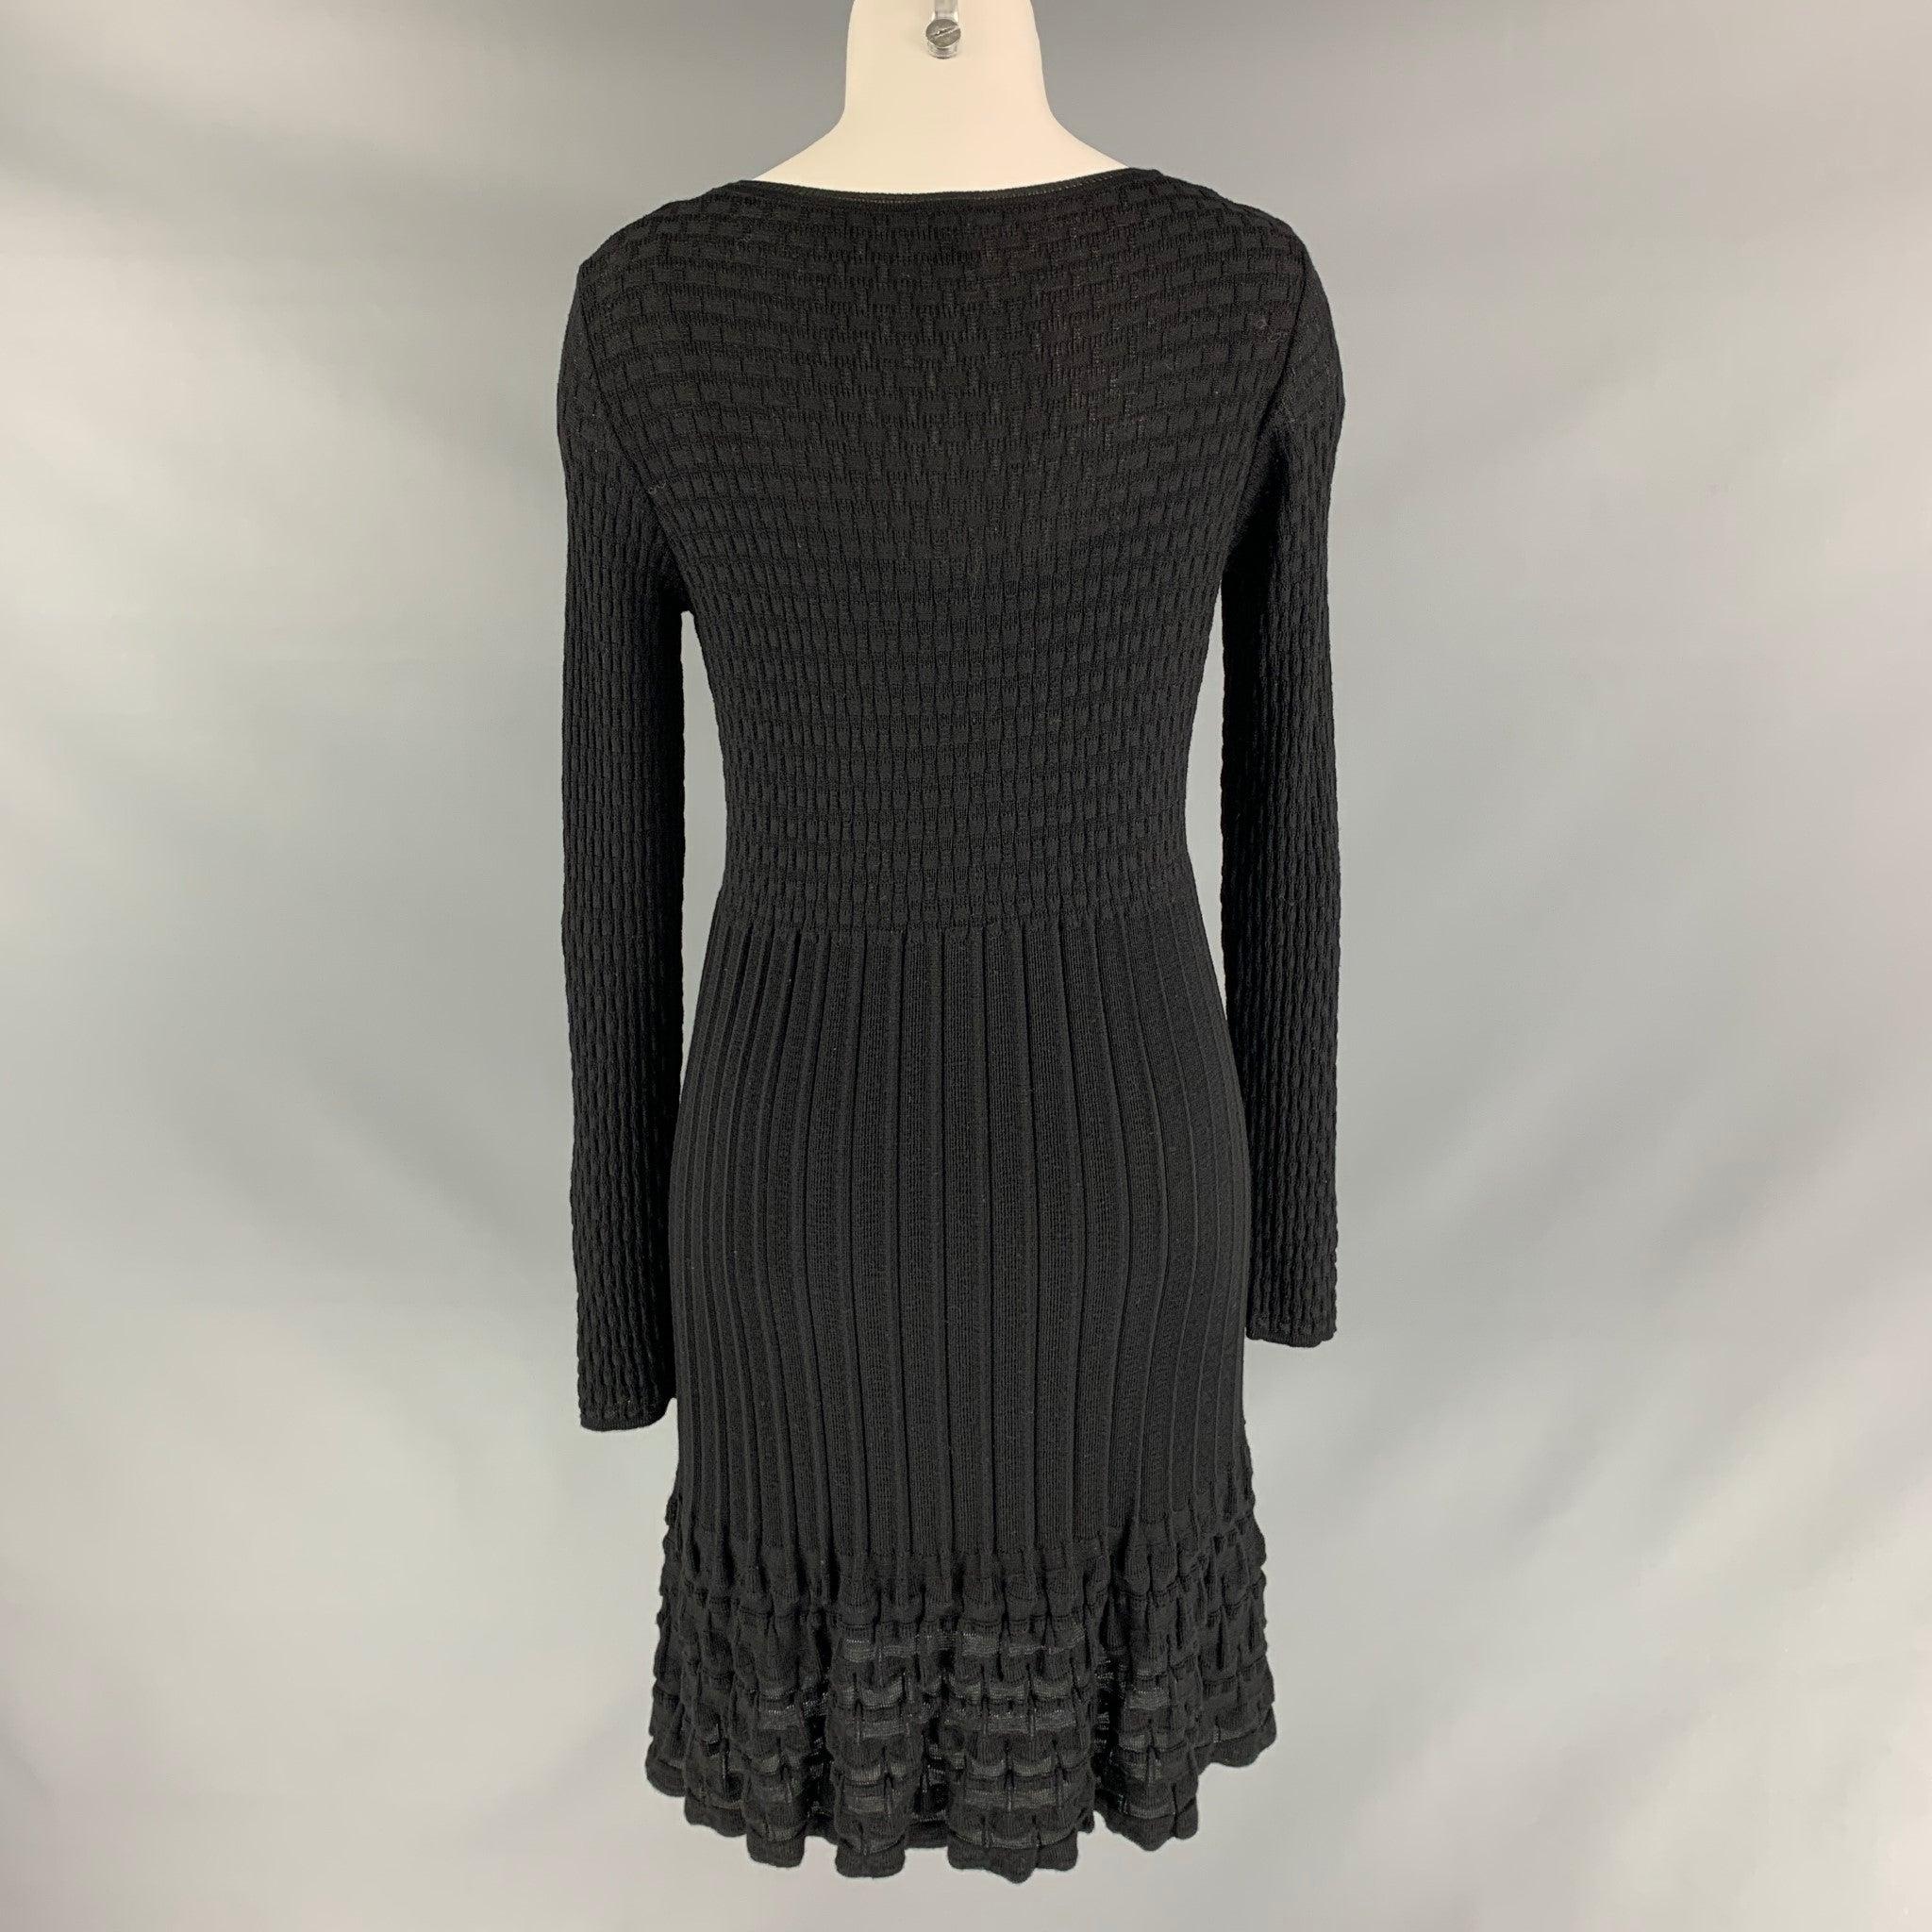 M MISSONI Size 8 Black Wool Blend Knitted A-Line Dress In Good Condition For Sale In San Francisco, CA